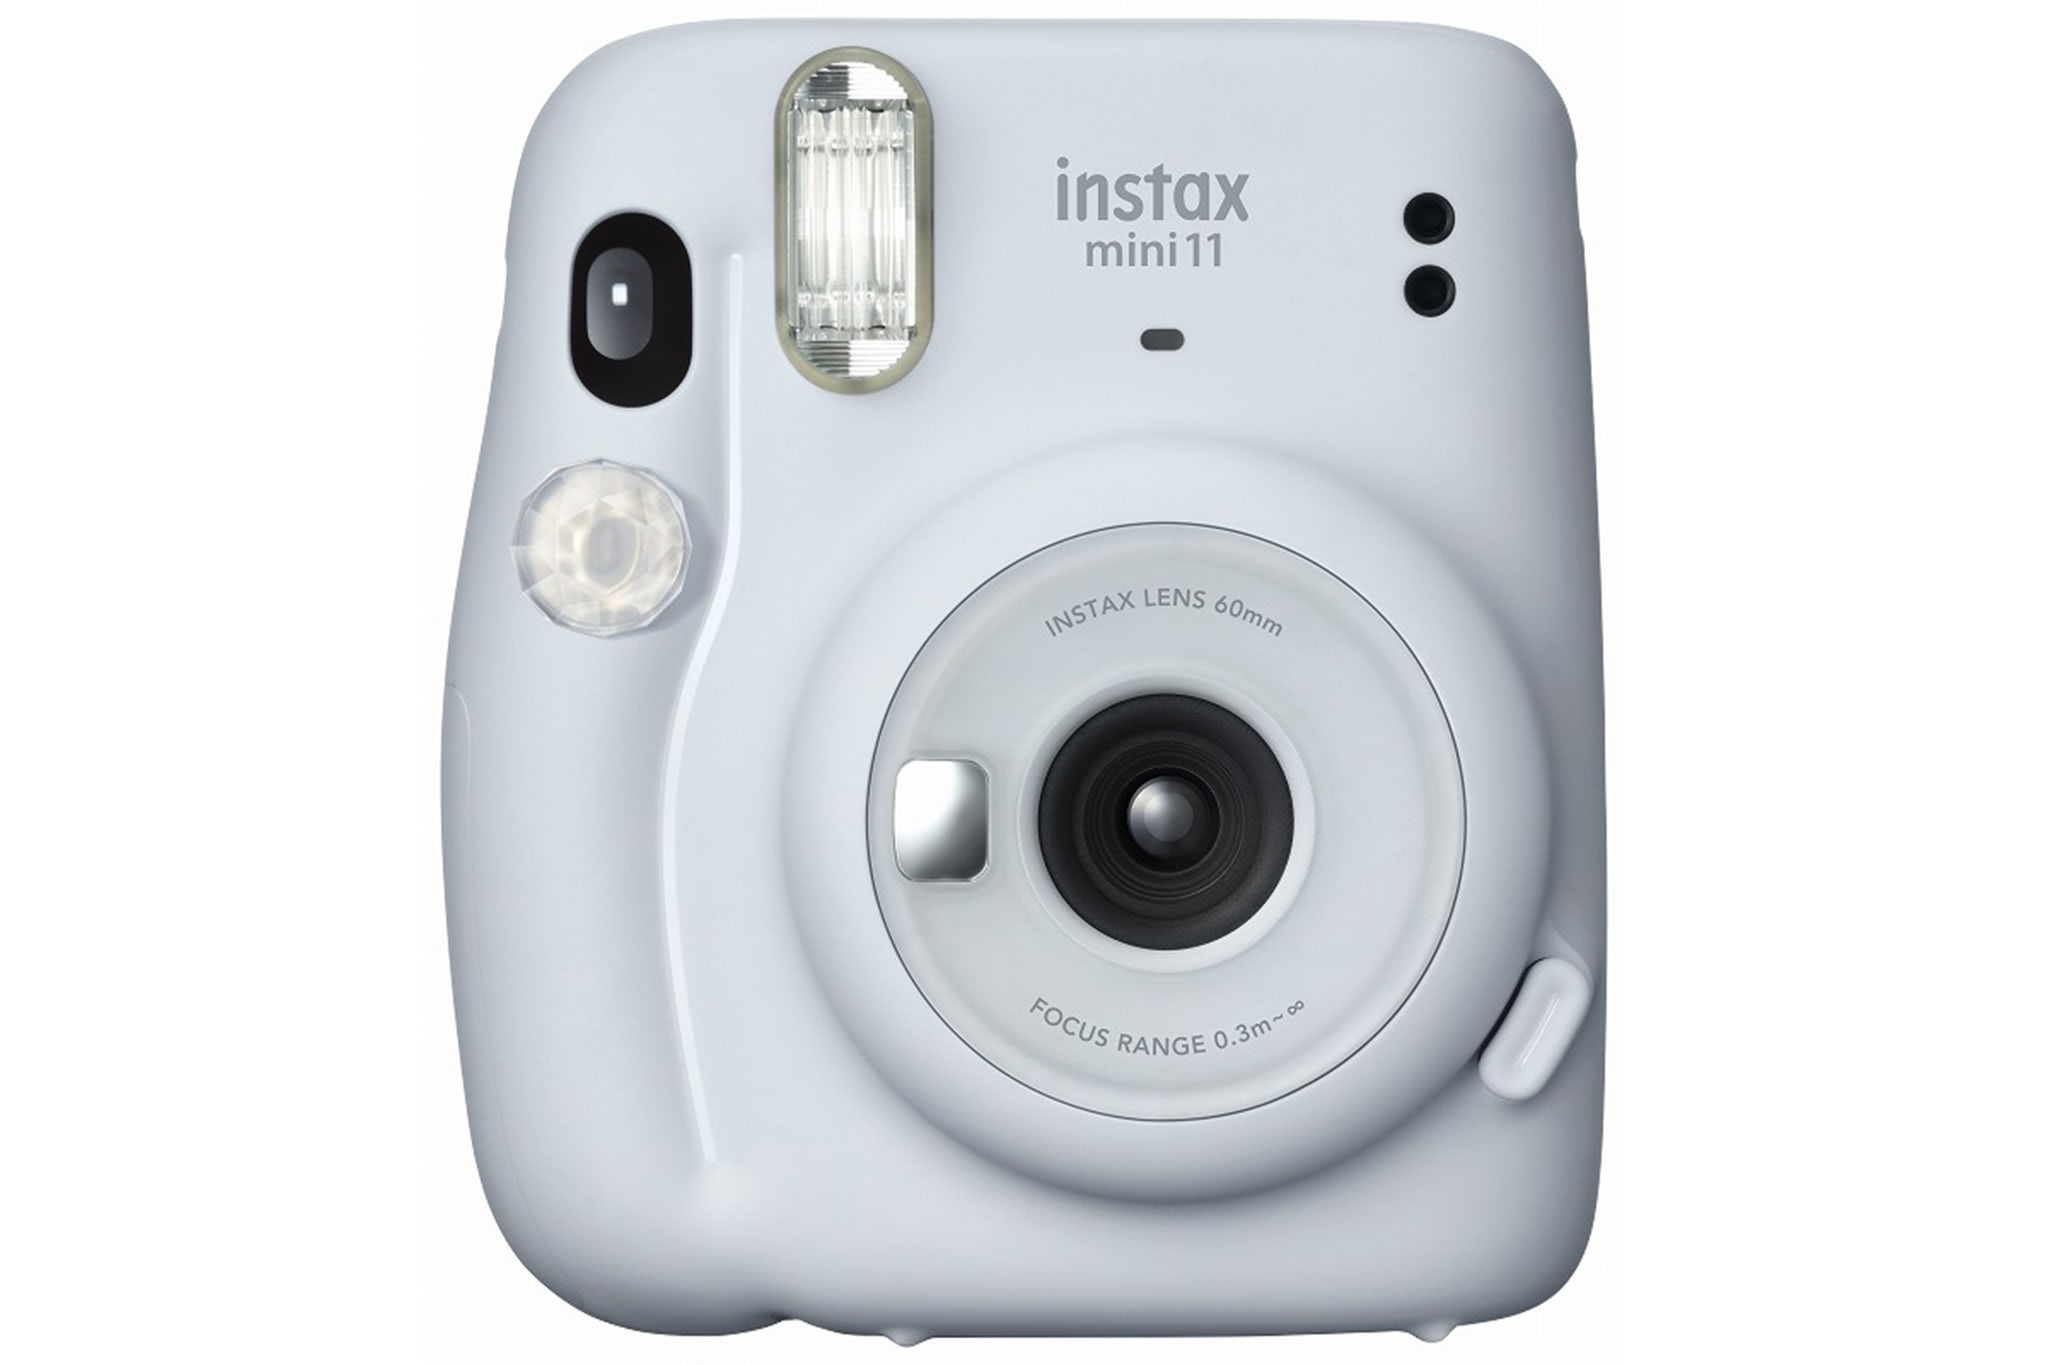 Fujifilm Instax Mini 11 - Info about features, batteries & films